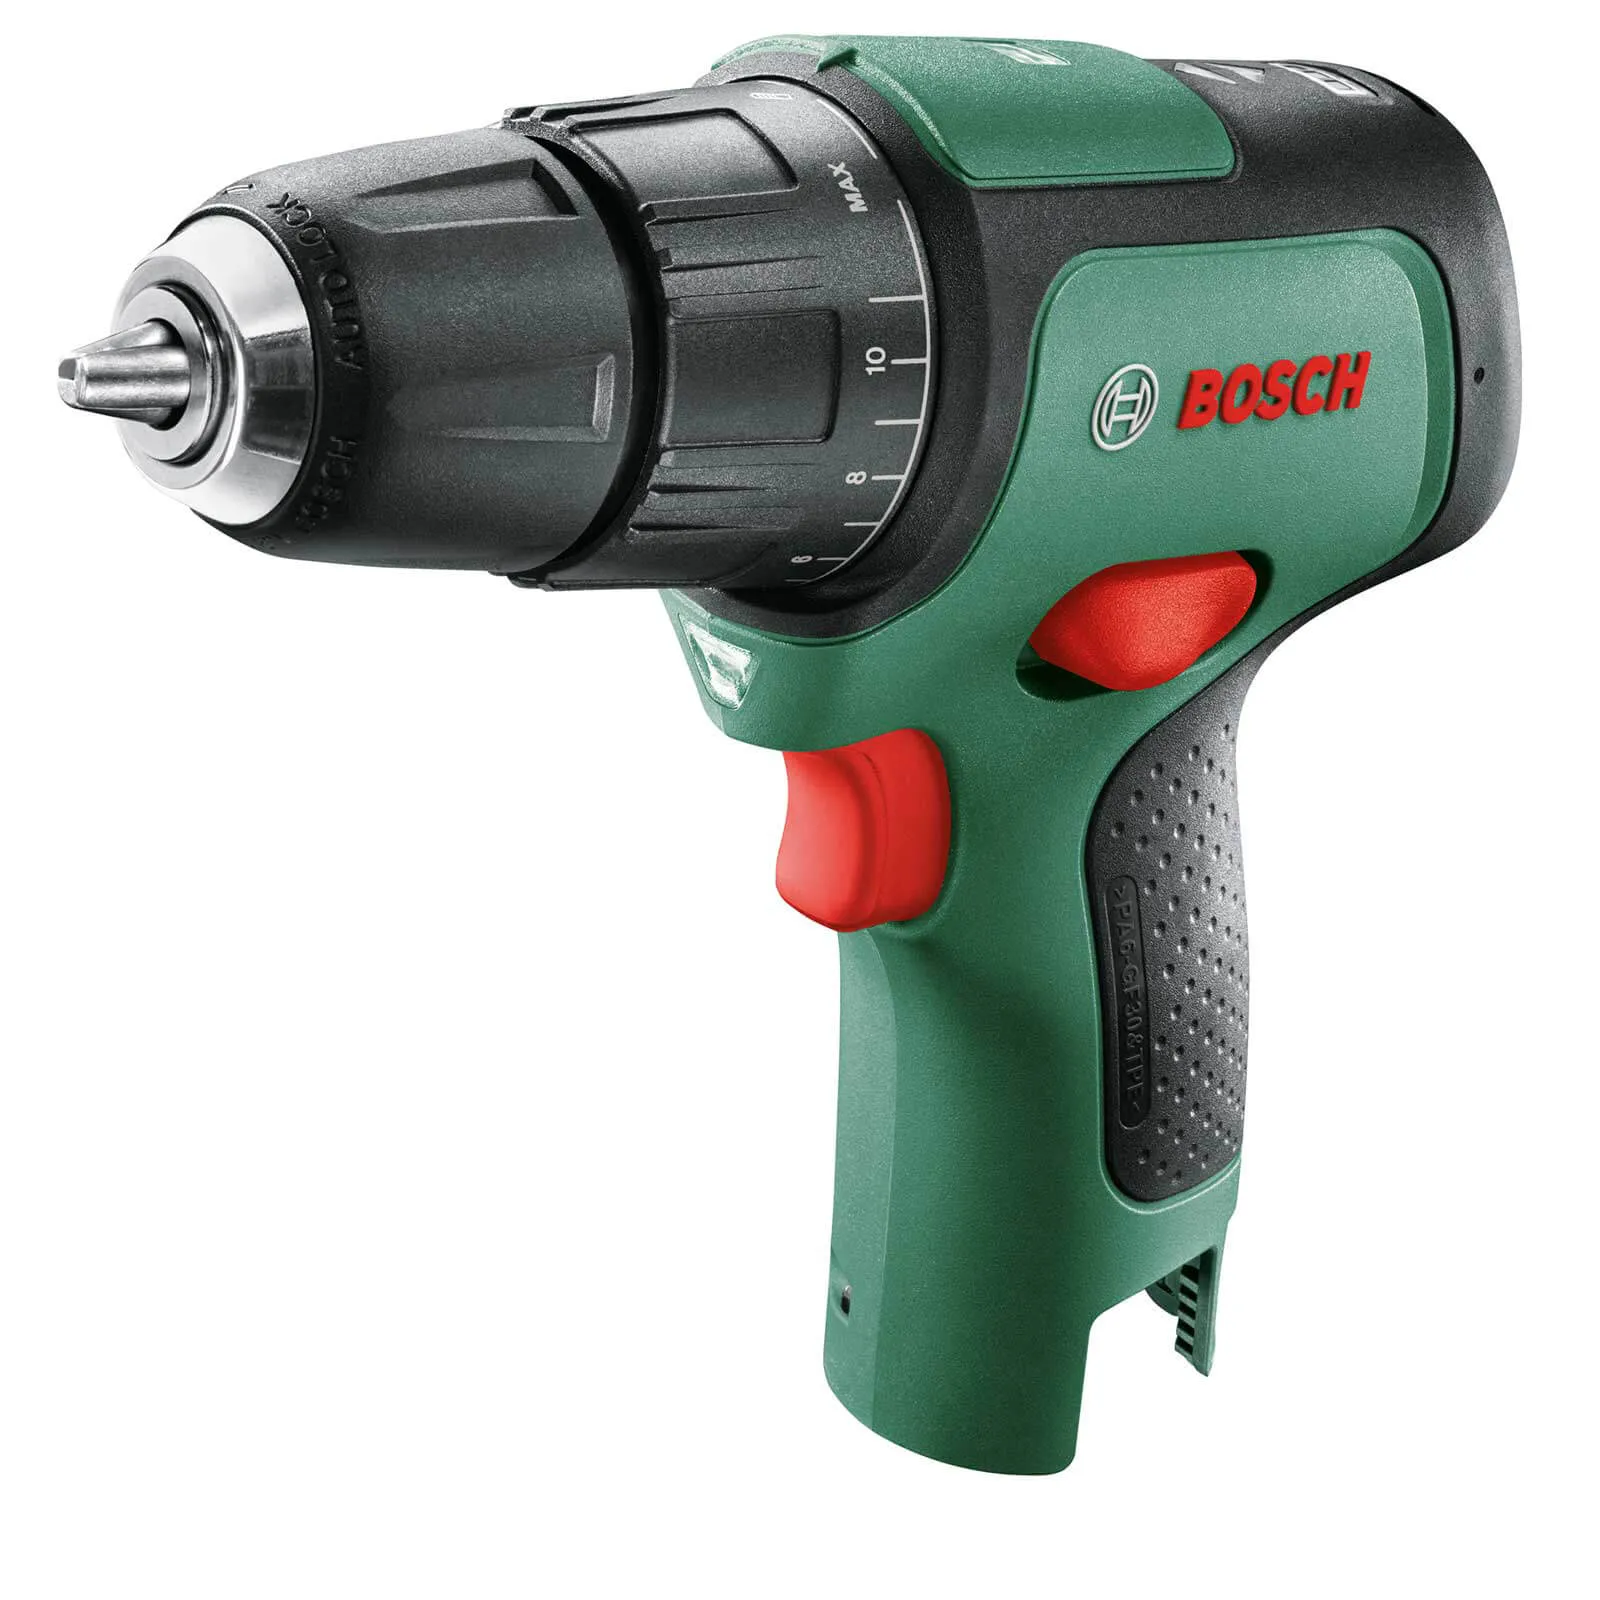 Bosch EASYIMPACT 12v Cordless Brushless Combi Drill - No Batteries, Charger, No Case